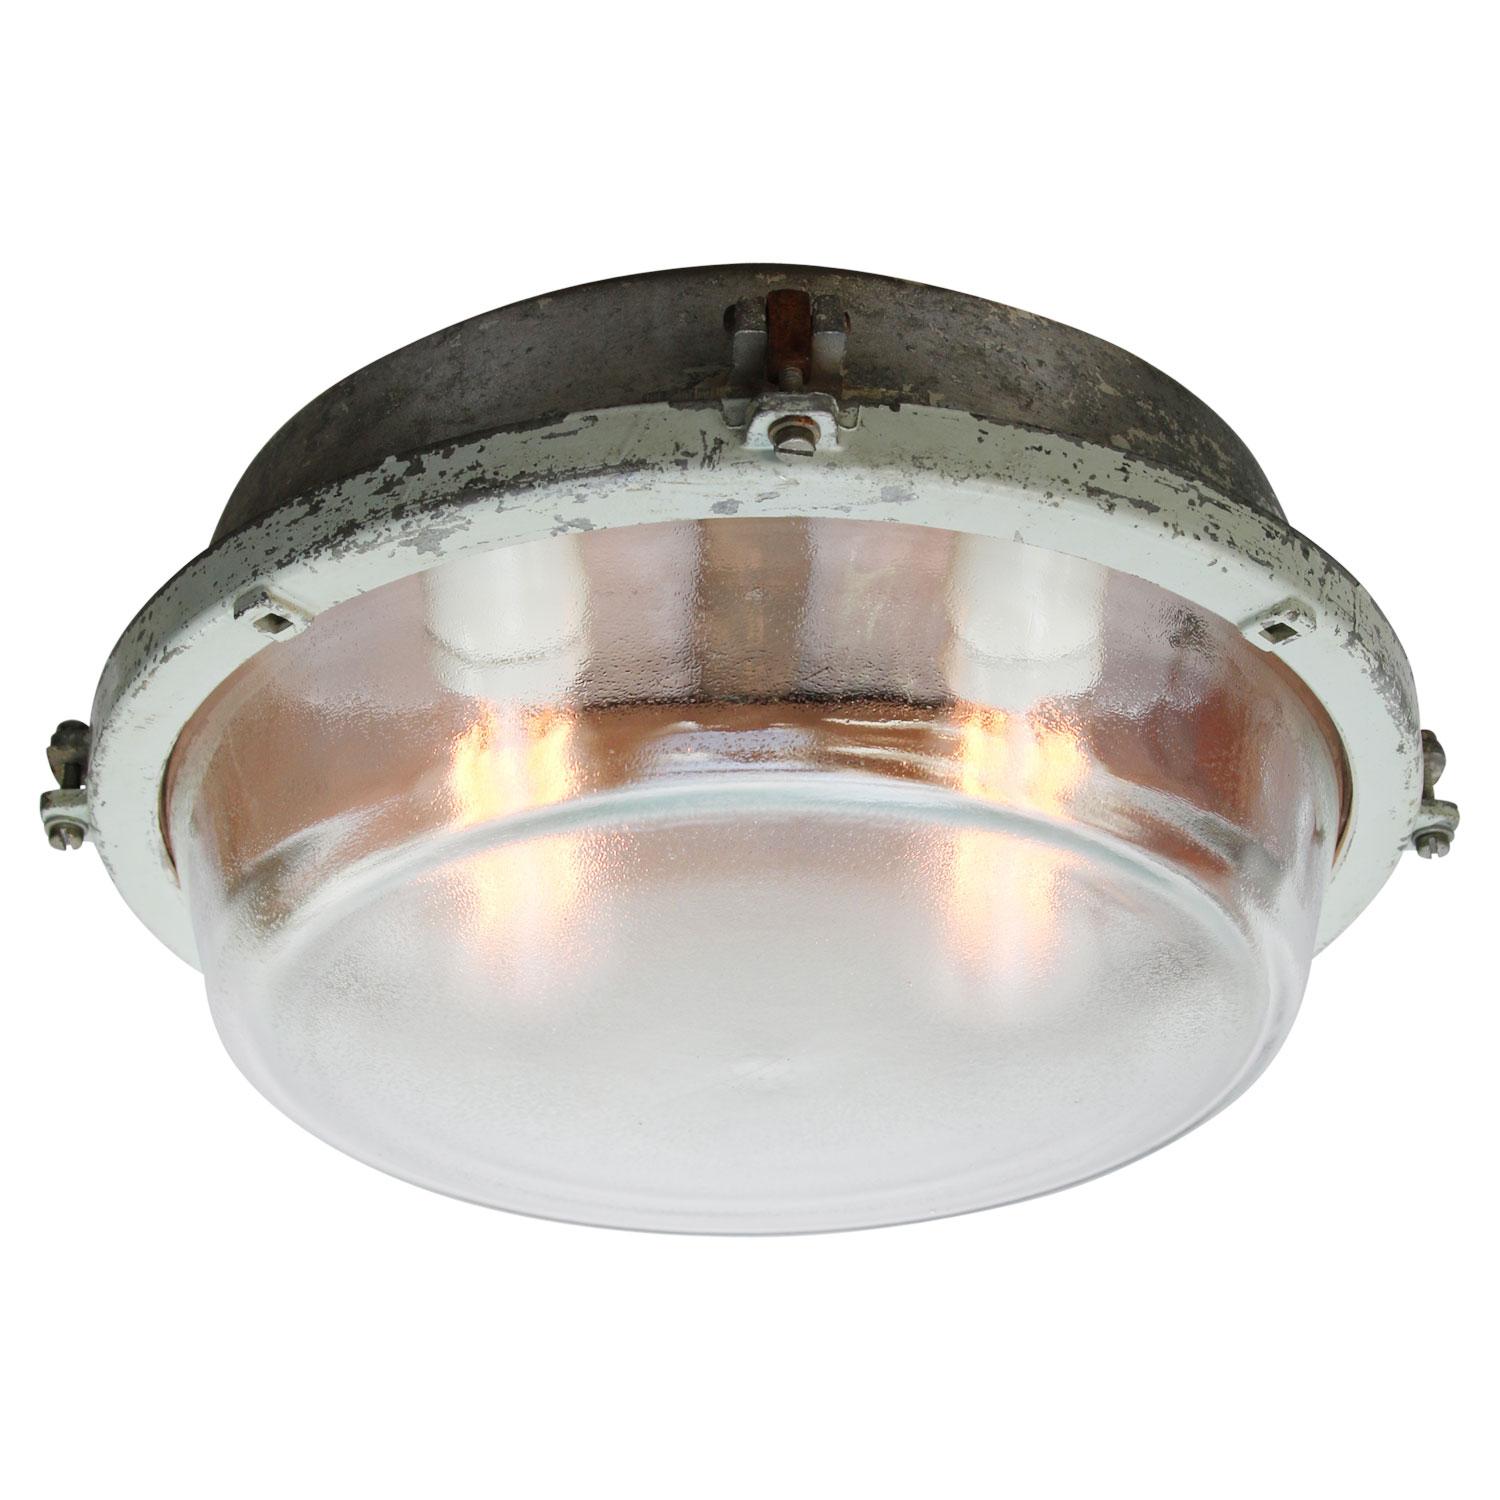 Industrial wall / ceiling scone
gray cast aluminium
frosted glass

2 x E27 / E26

Weight: 5.00 kg / 11 lb

Priced per individual item. All lamps have been made suitable by international standards for incandescent light bulbs,